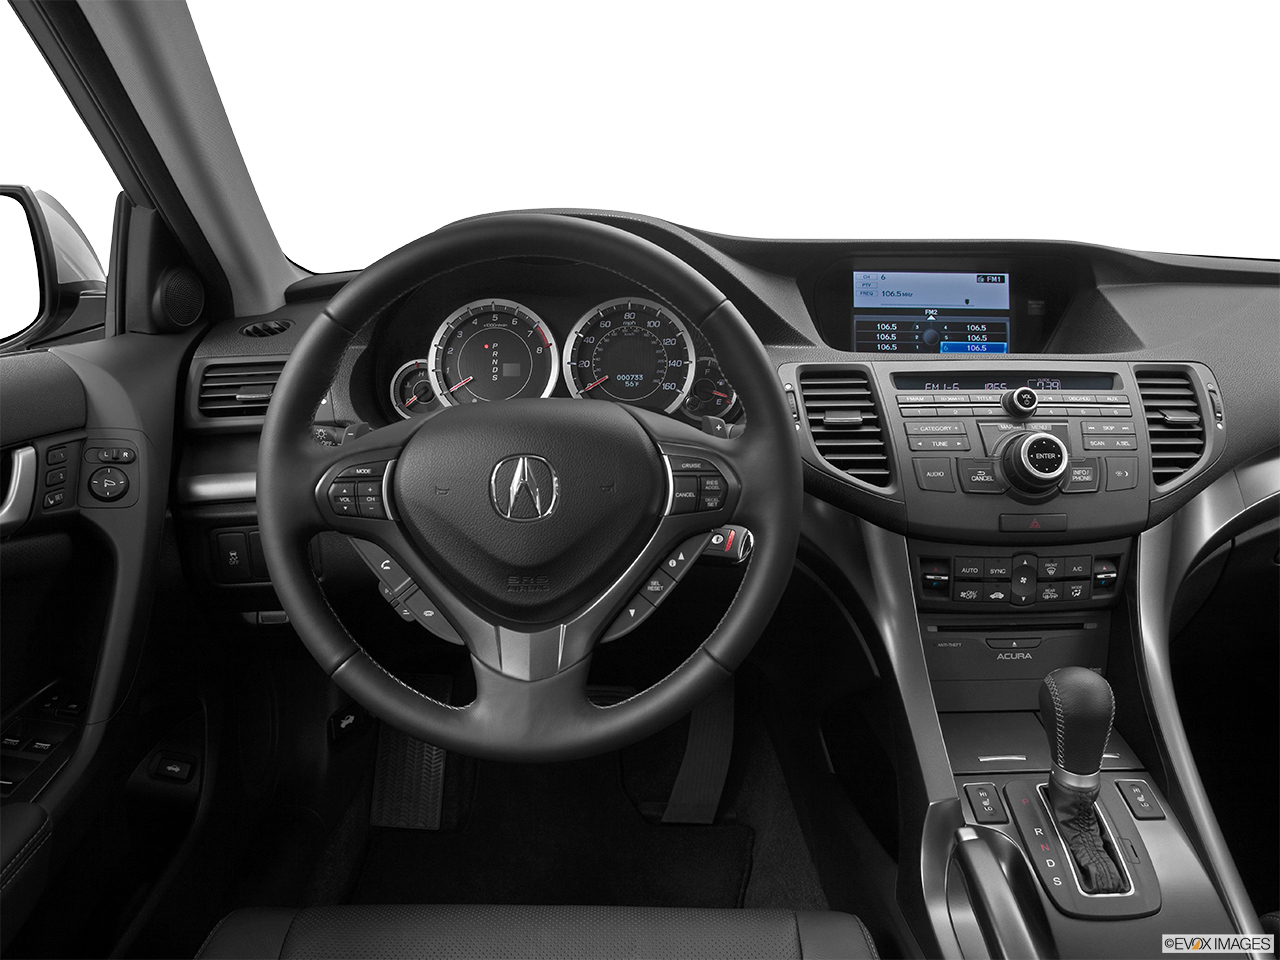 2013 Acura TSX 5-Speed Automatic Steering wheel/Center Console. 